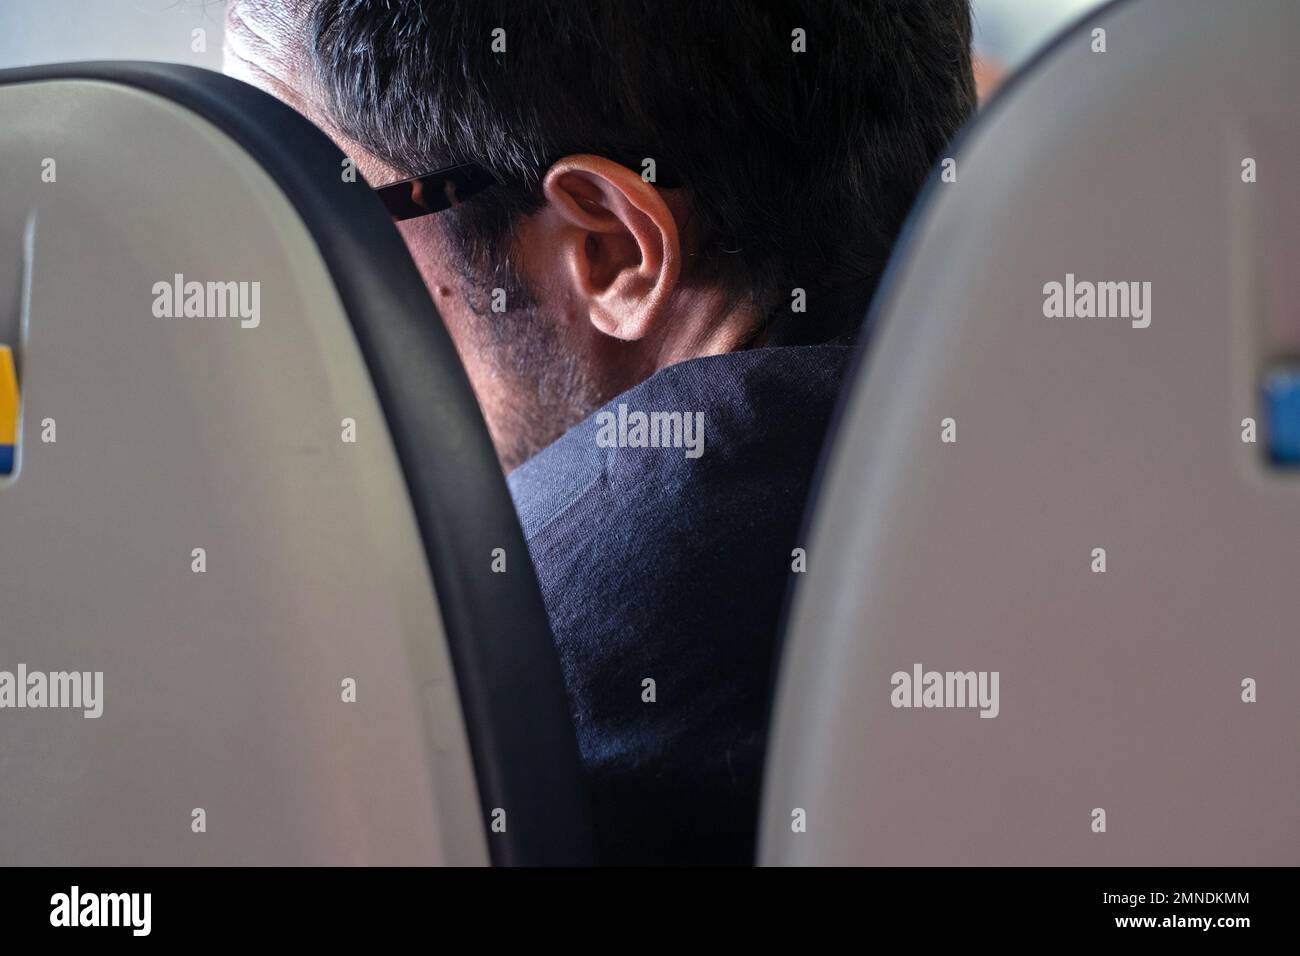 A man looks out a window of an airplane during flight. Stock Photo